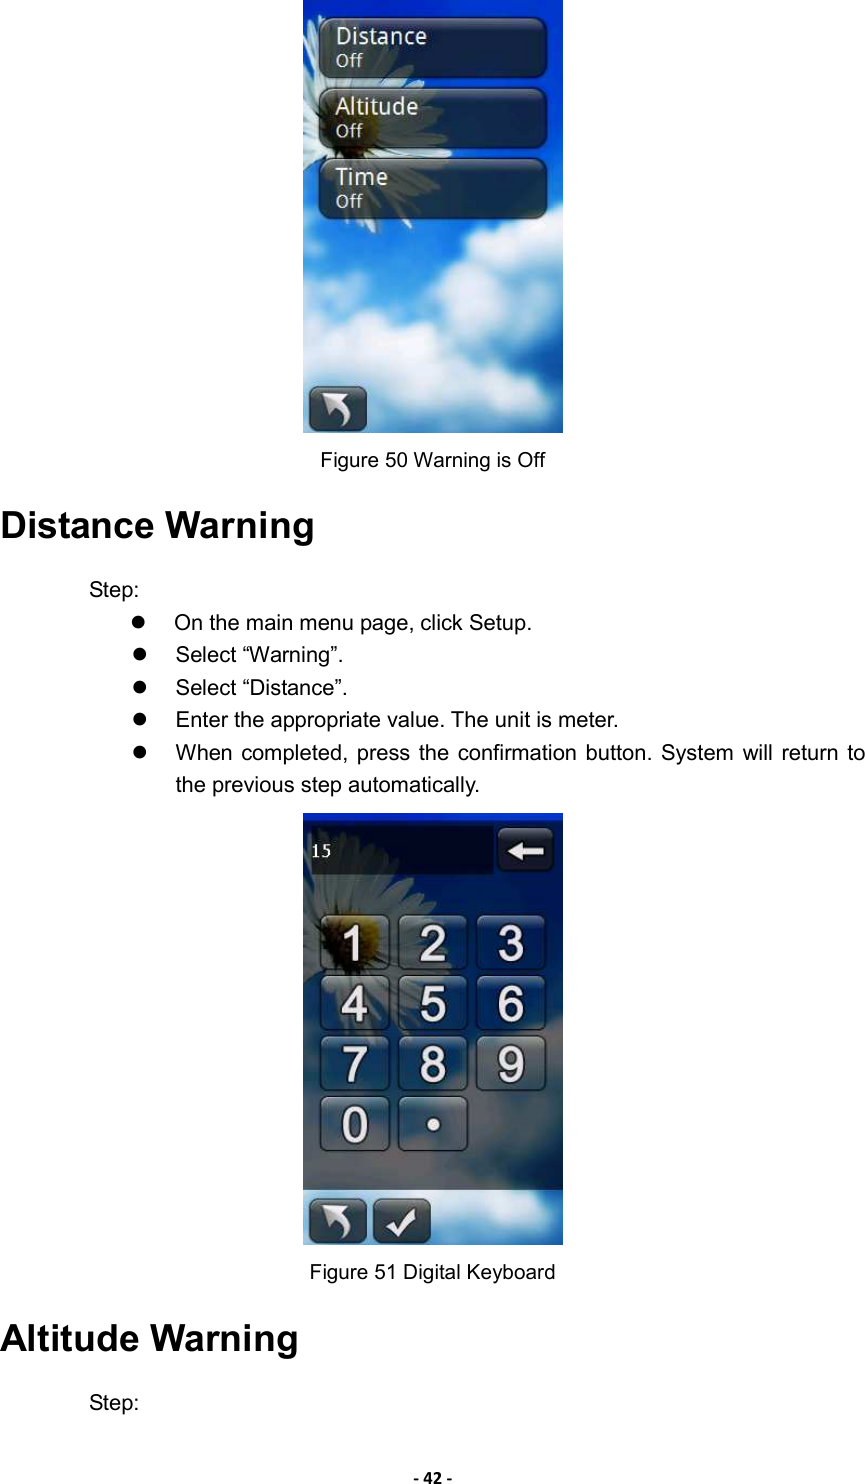 - 42 -  Figure 50 Warning is Off Distance Warning Step:   On the main menu page, click Setup.   Select “Warning”.   Select “Distance”.     Enter the appropriate value. The unit is meter.     When completed, press the confirmation button. System  will return  to the previous step automatically.  Figure 51 Digital Keyboard Altitude Warning Step: 